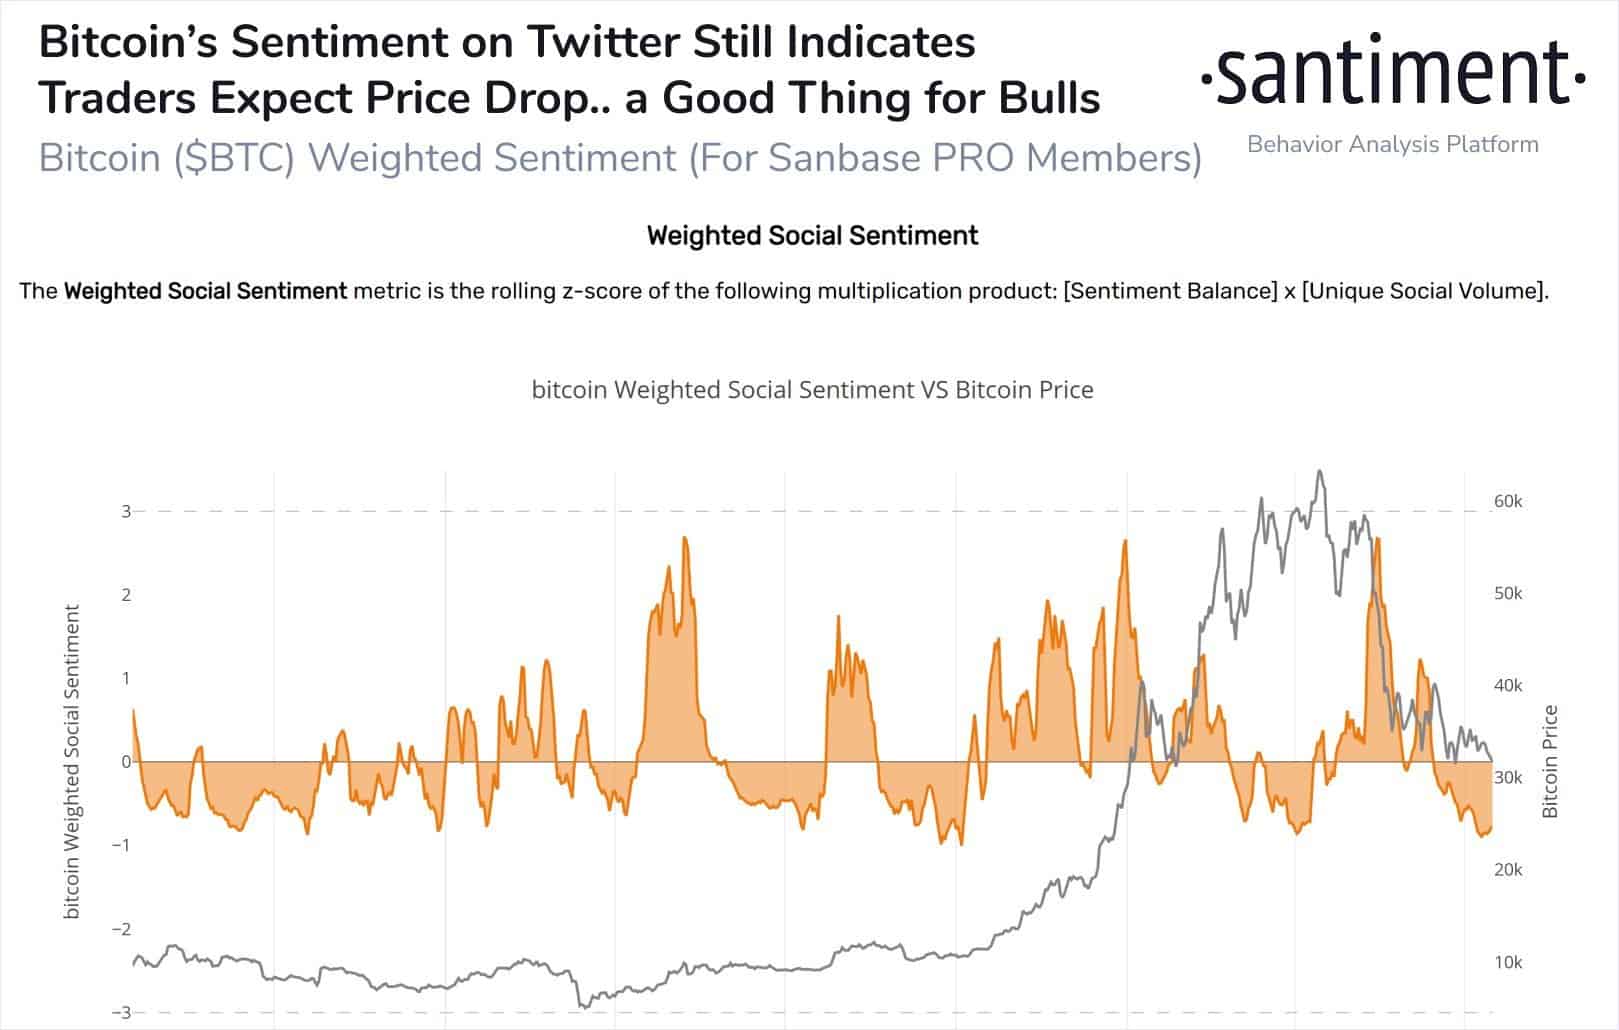 Crypto Twitter Sentiment on Bitcoin. Source: Santiment